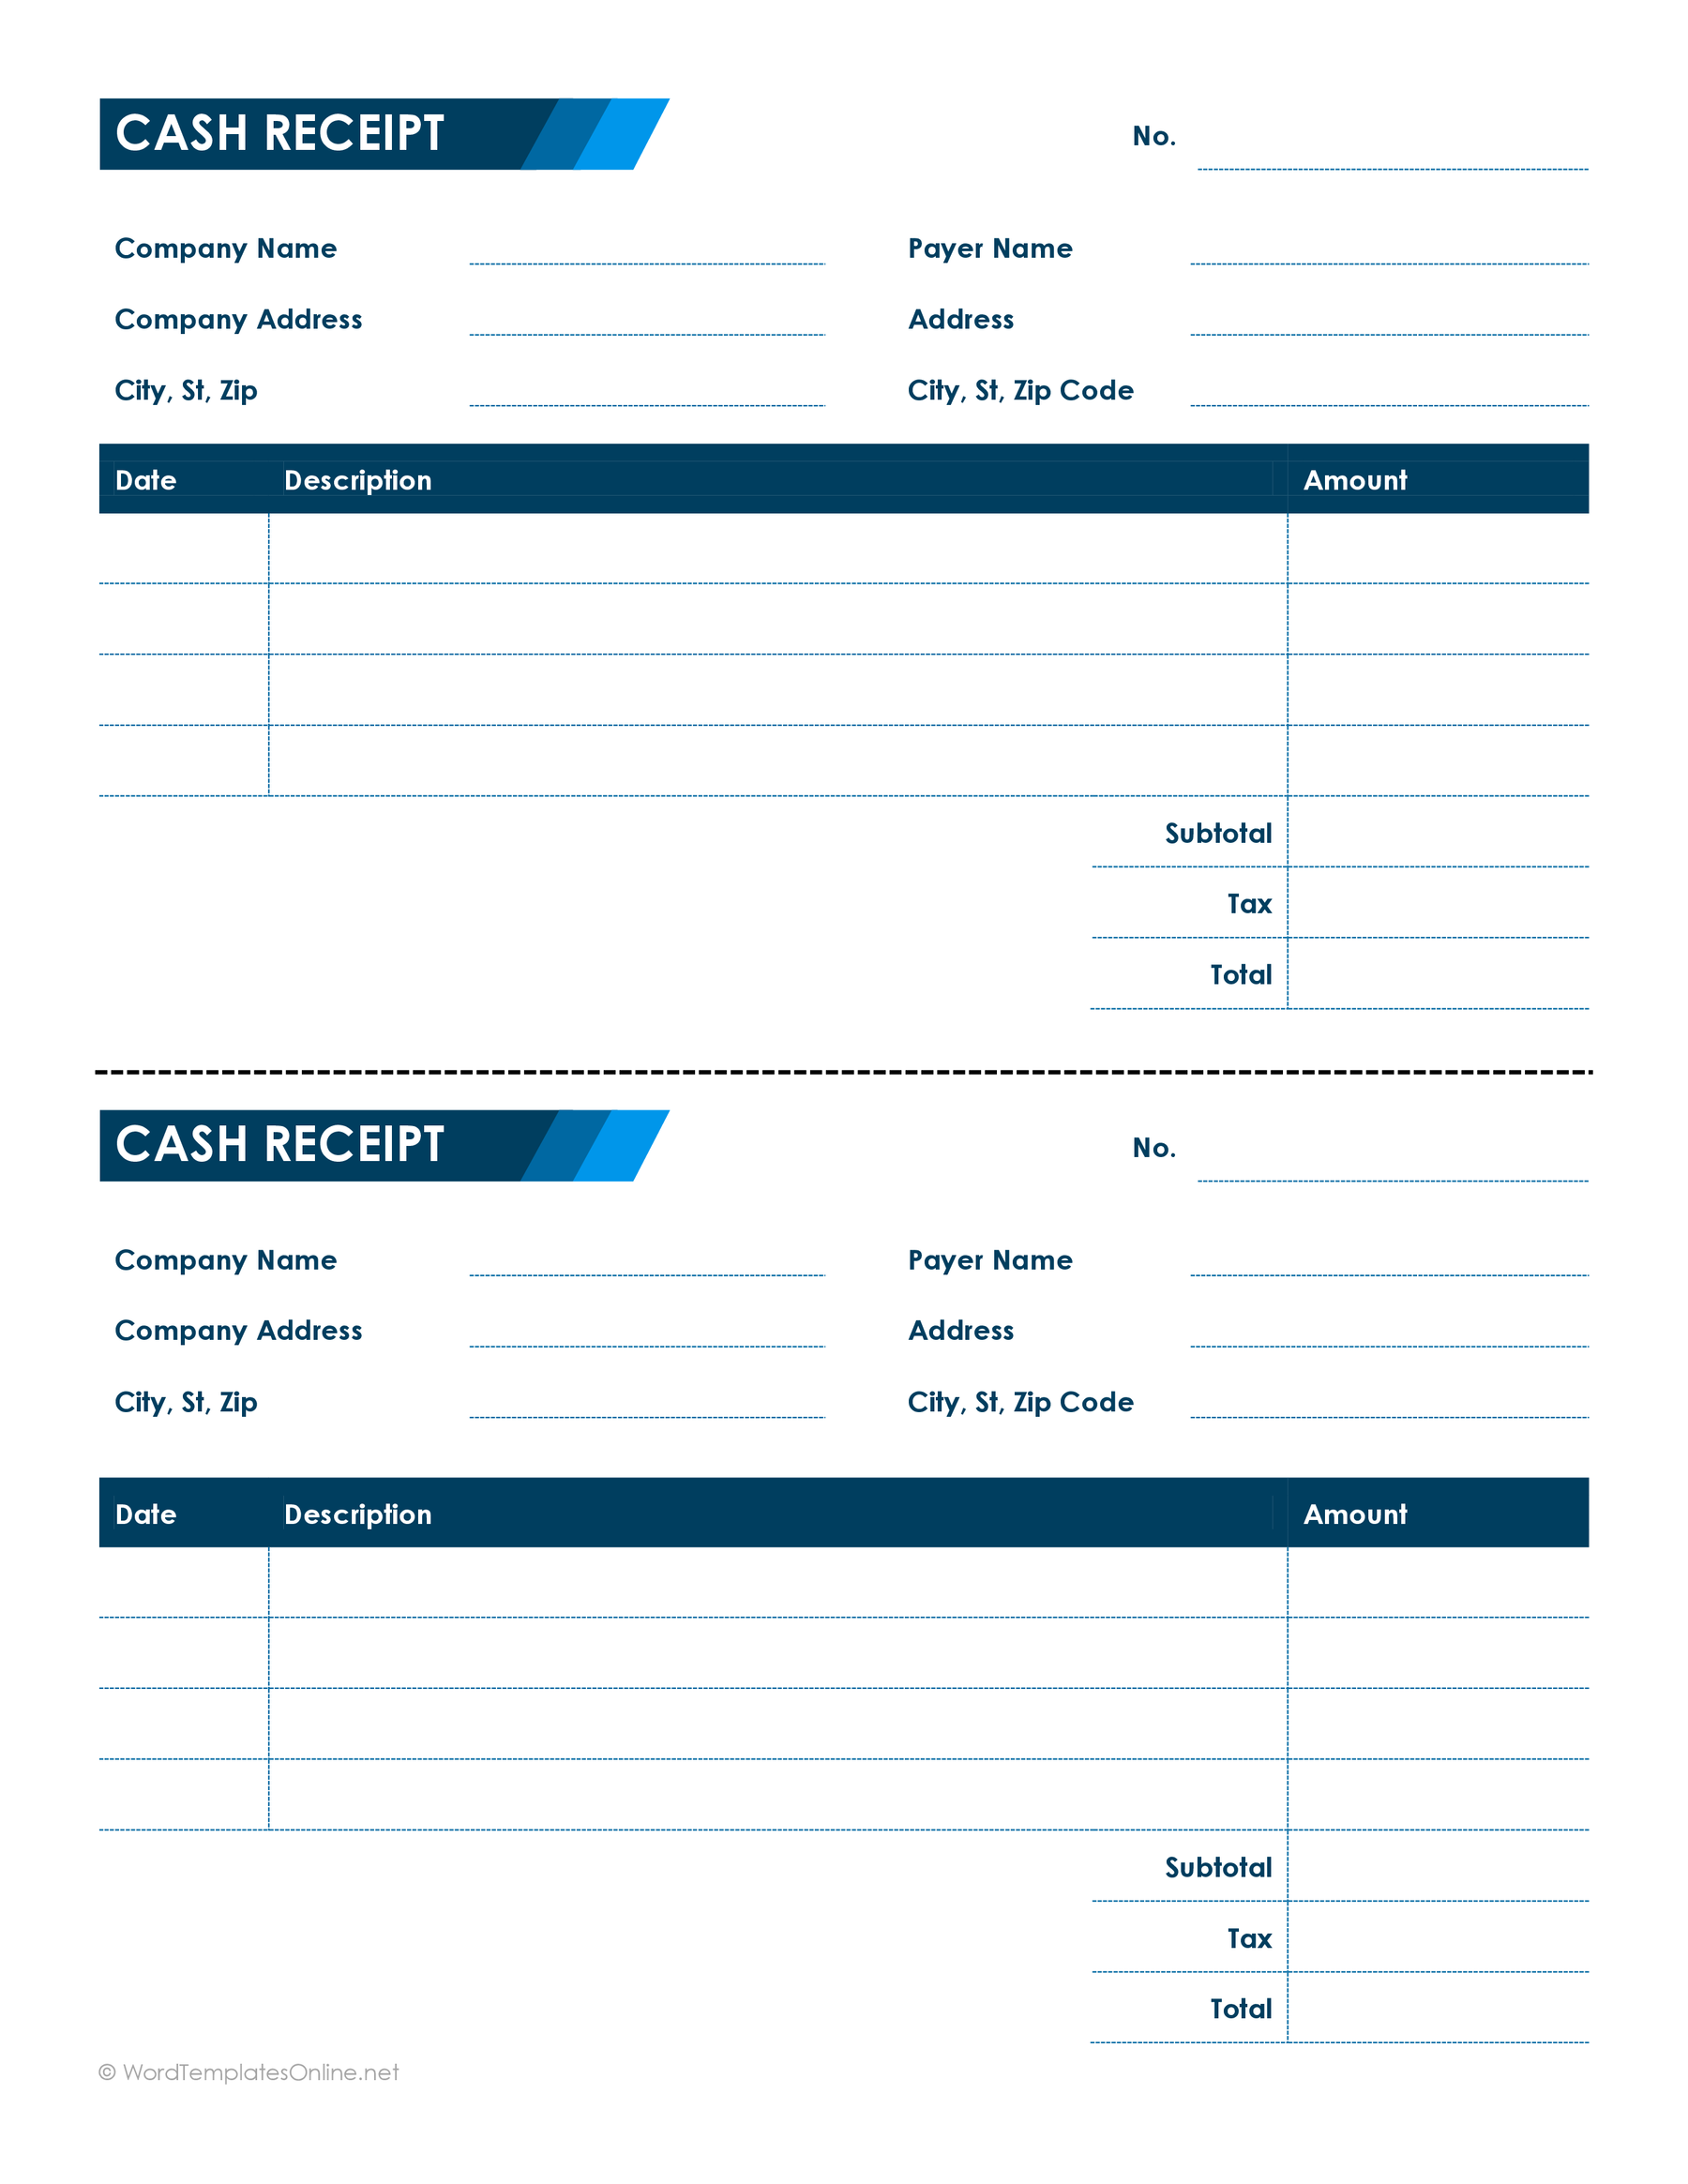 free receipt template word